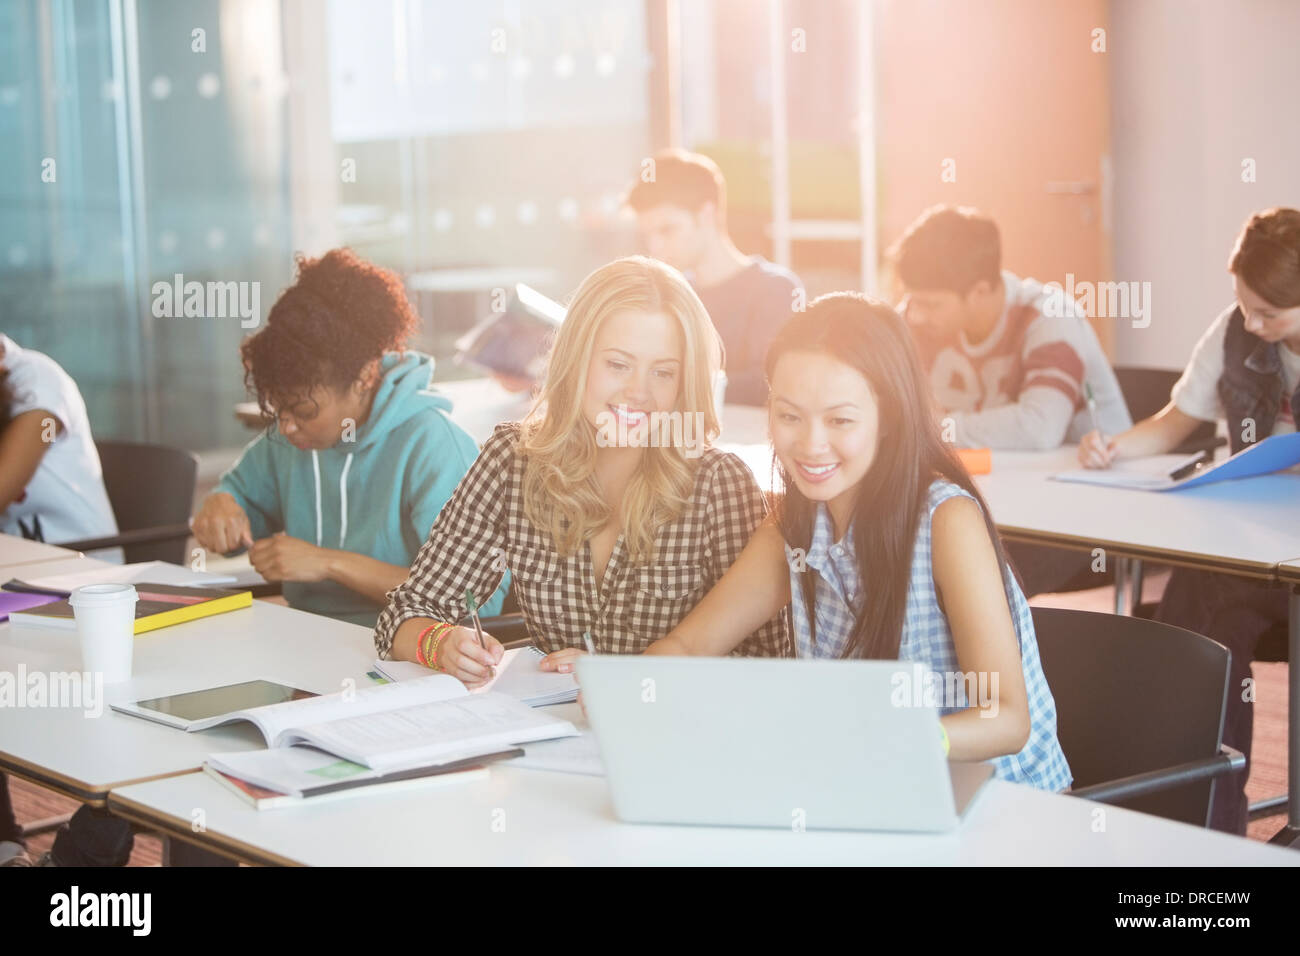 University students working in classroom Stock Photo